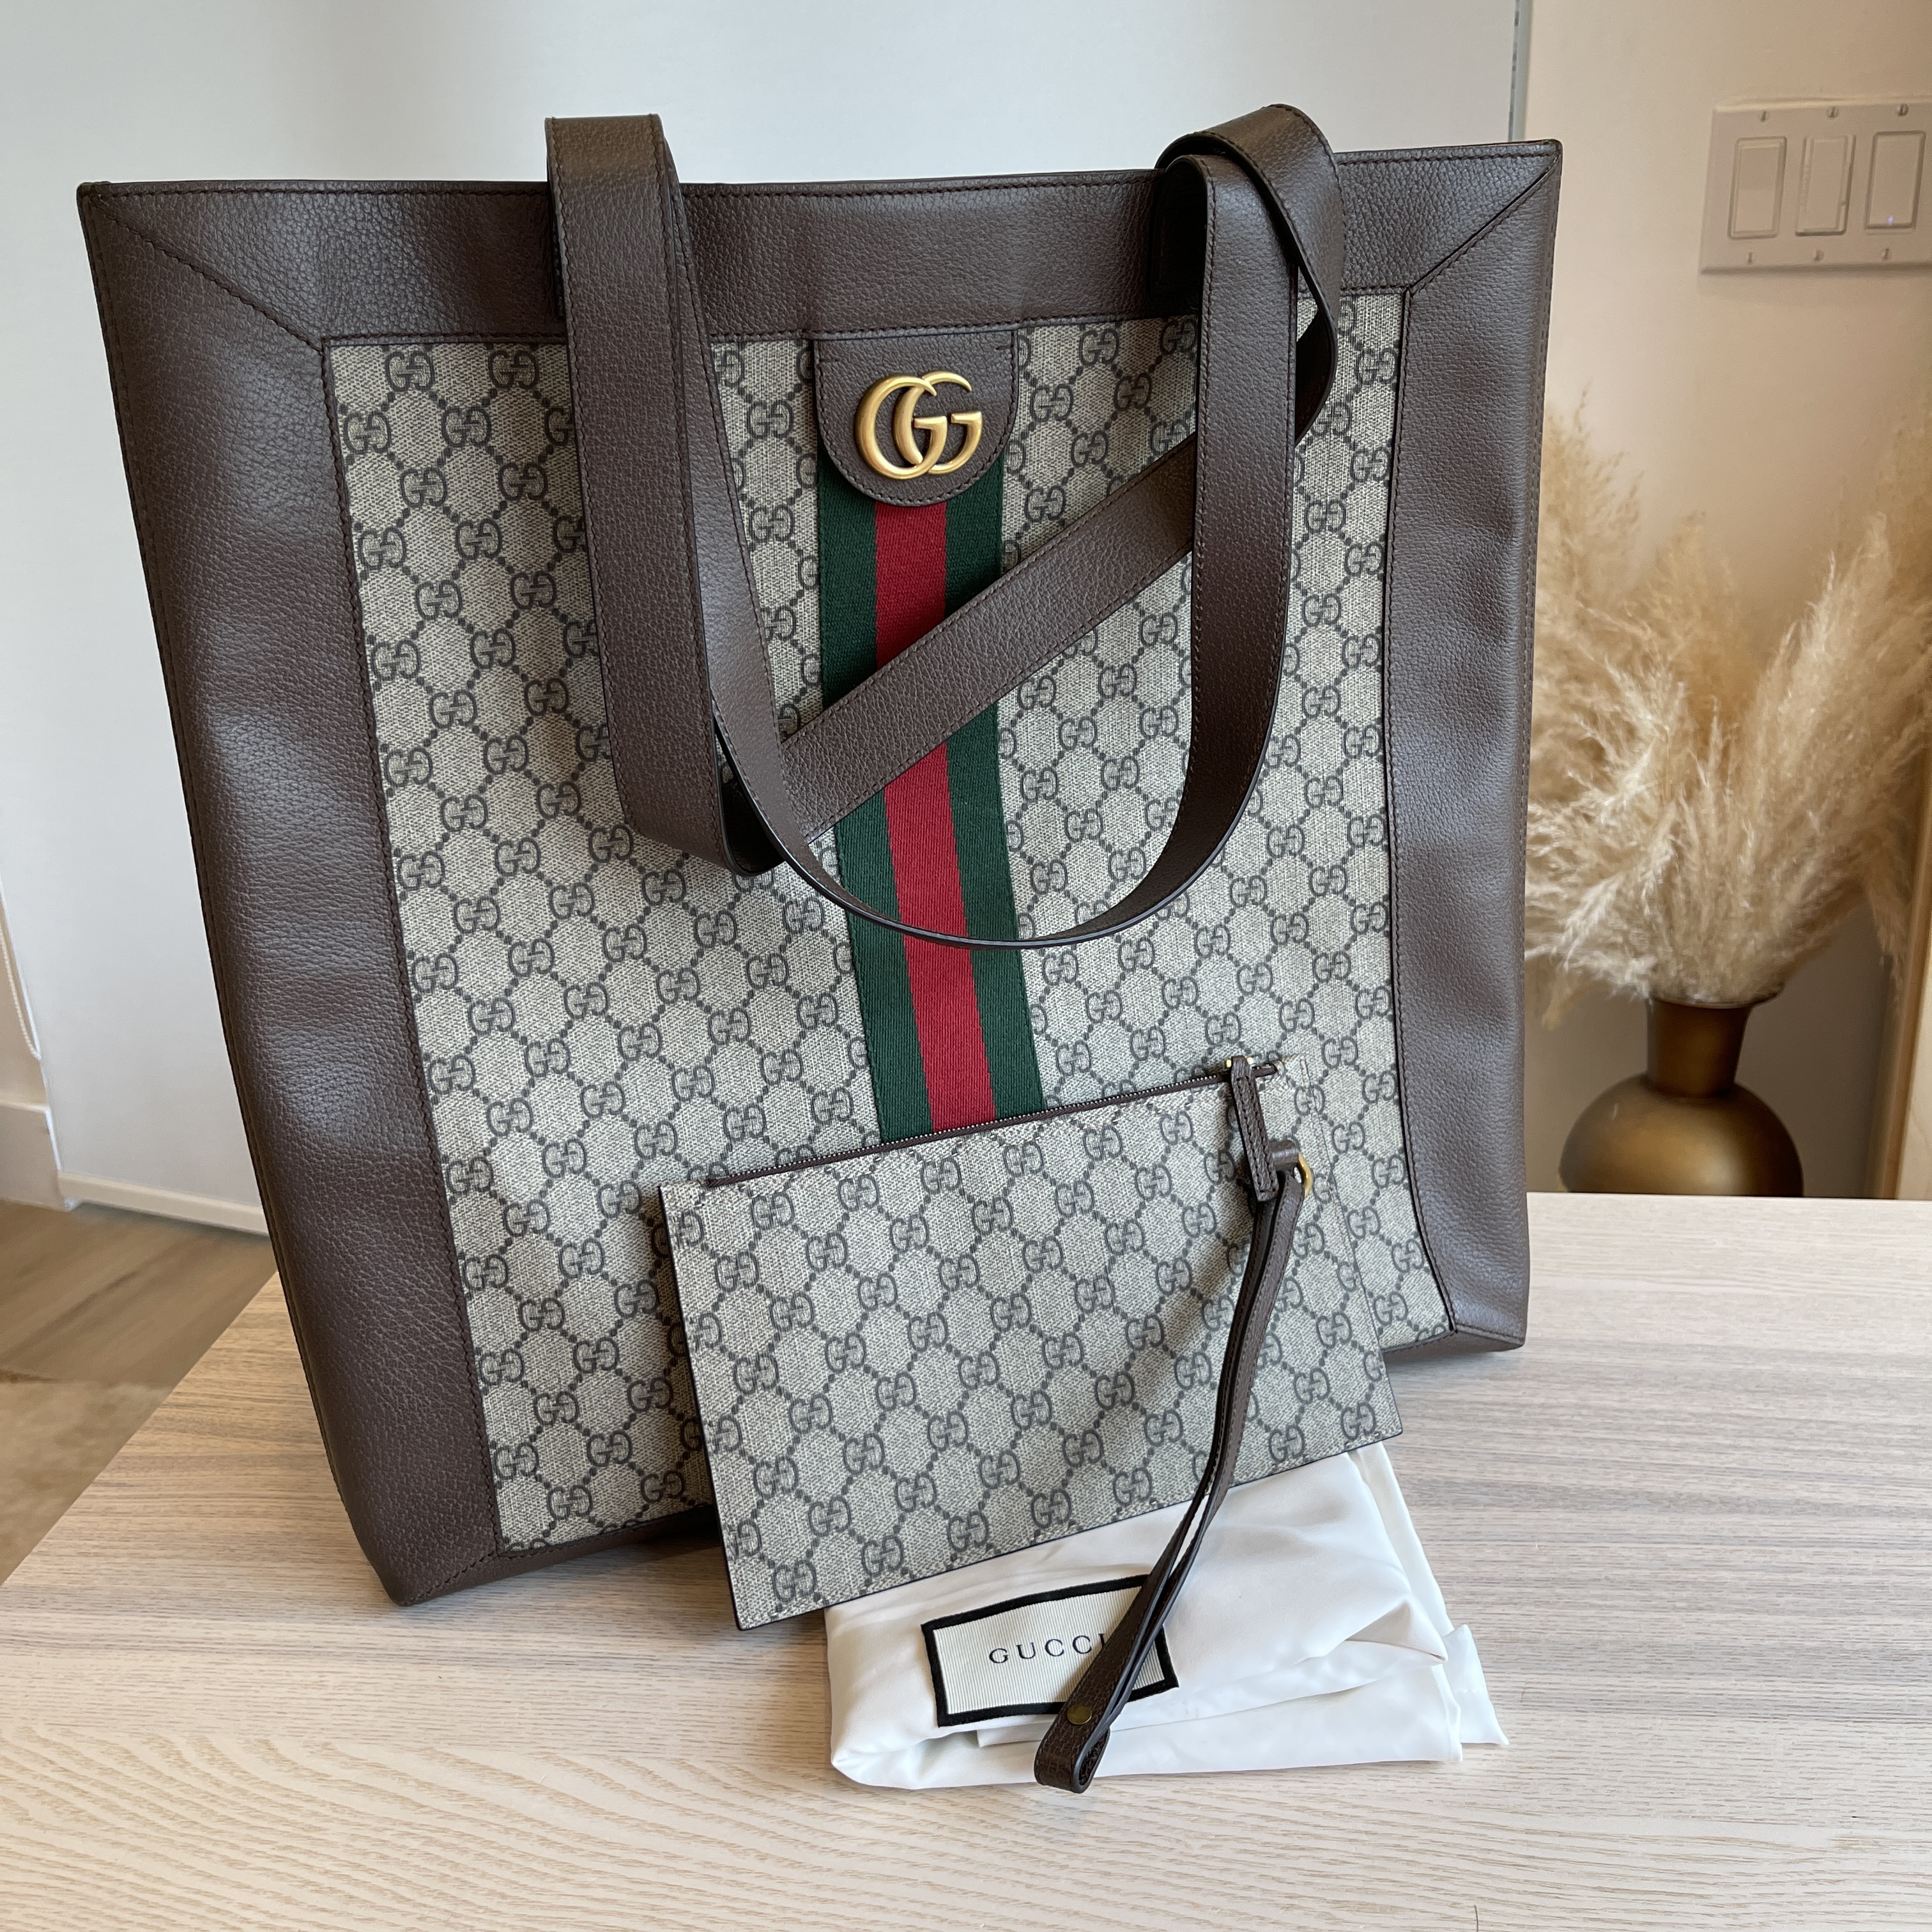 Ophidia gg supreme shopping bag by Gucci